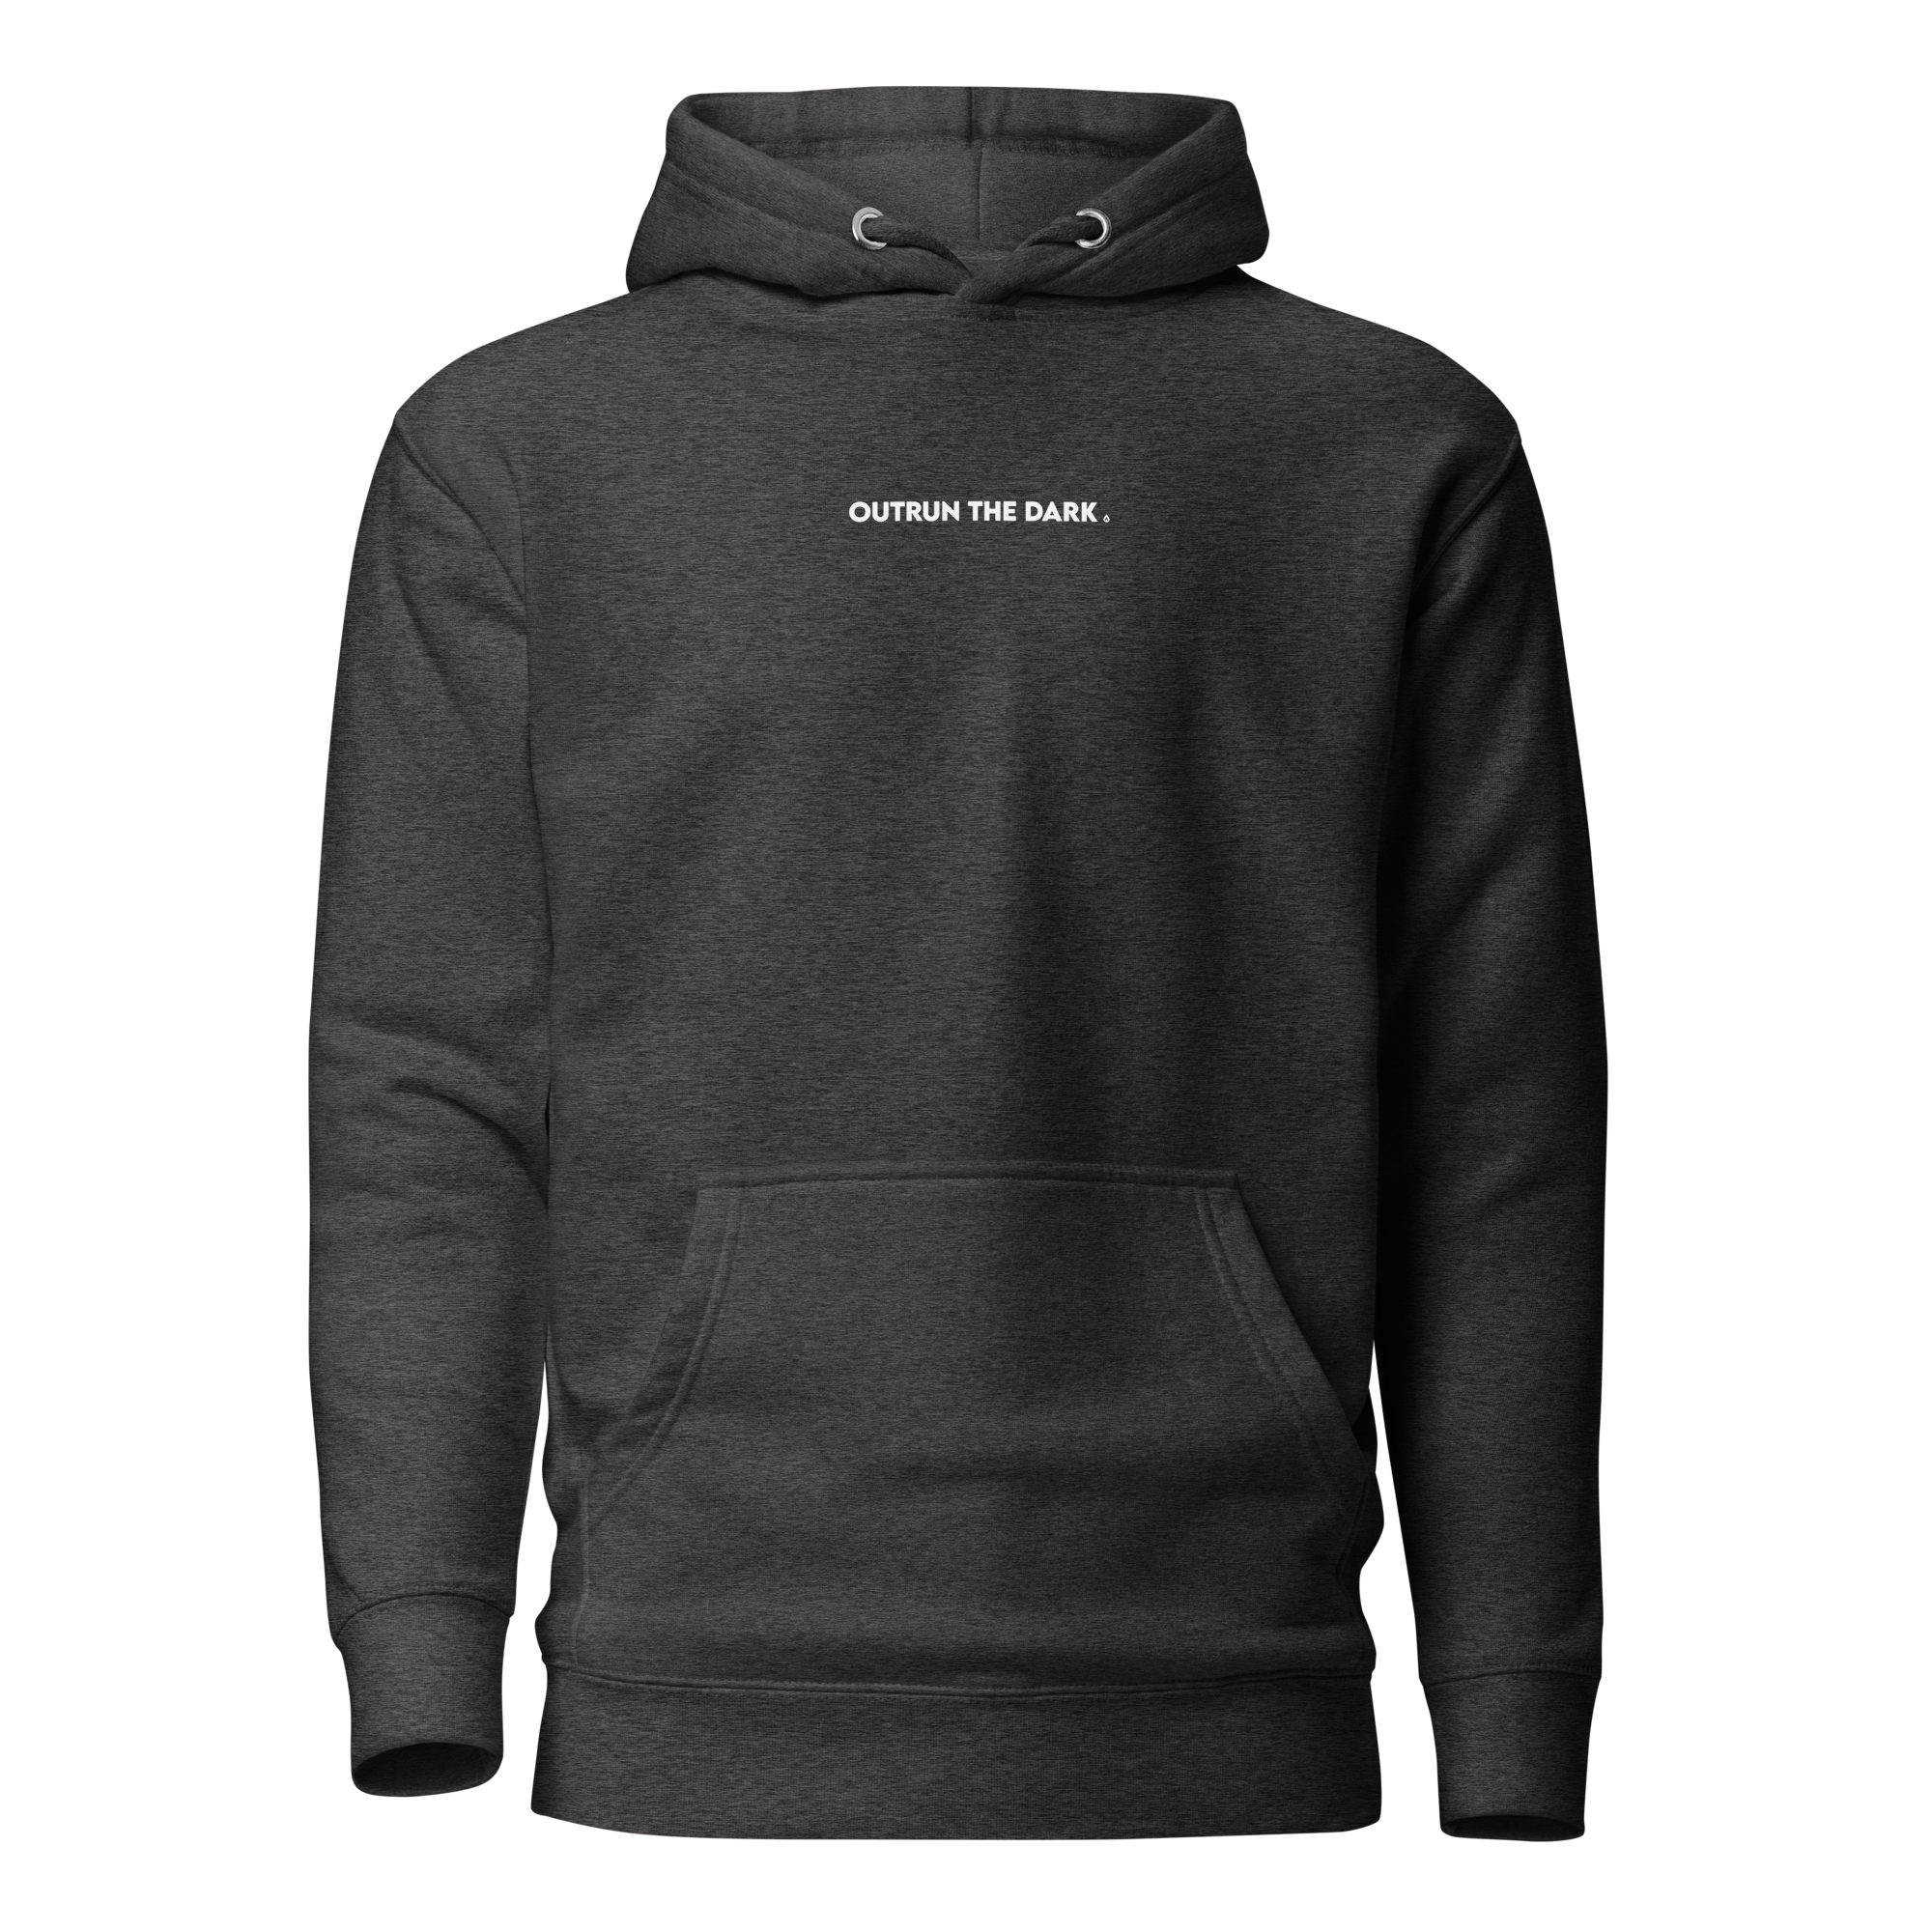 Outrun the dark Women's Fitted Hoodie